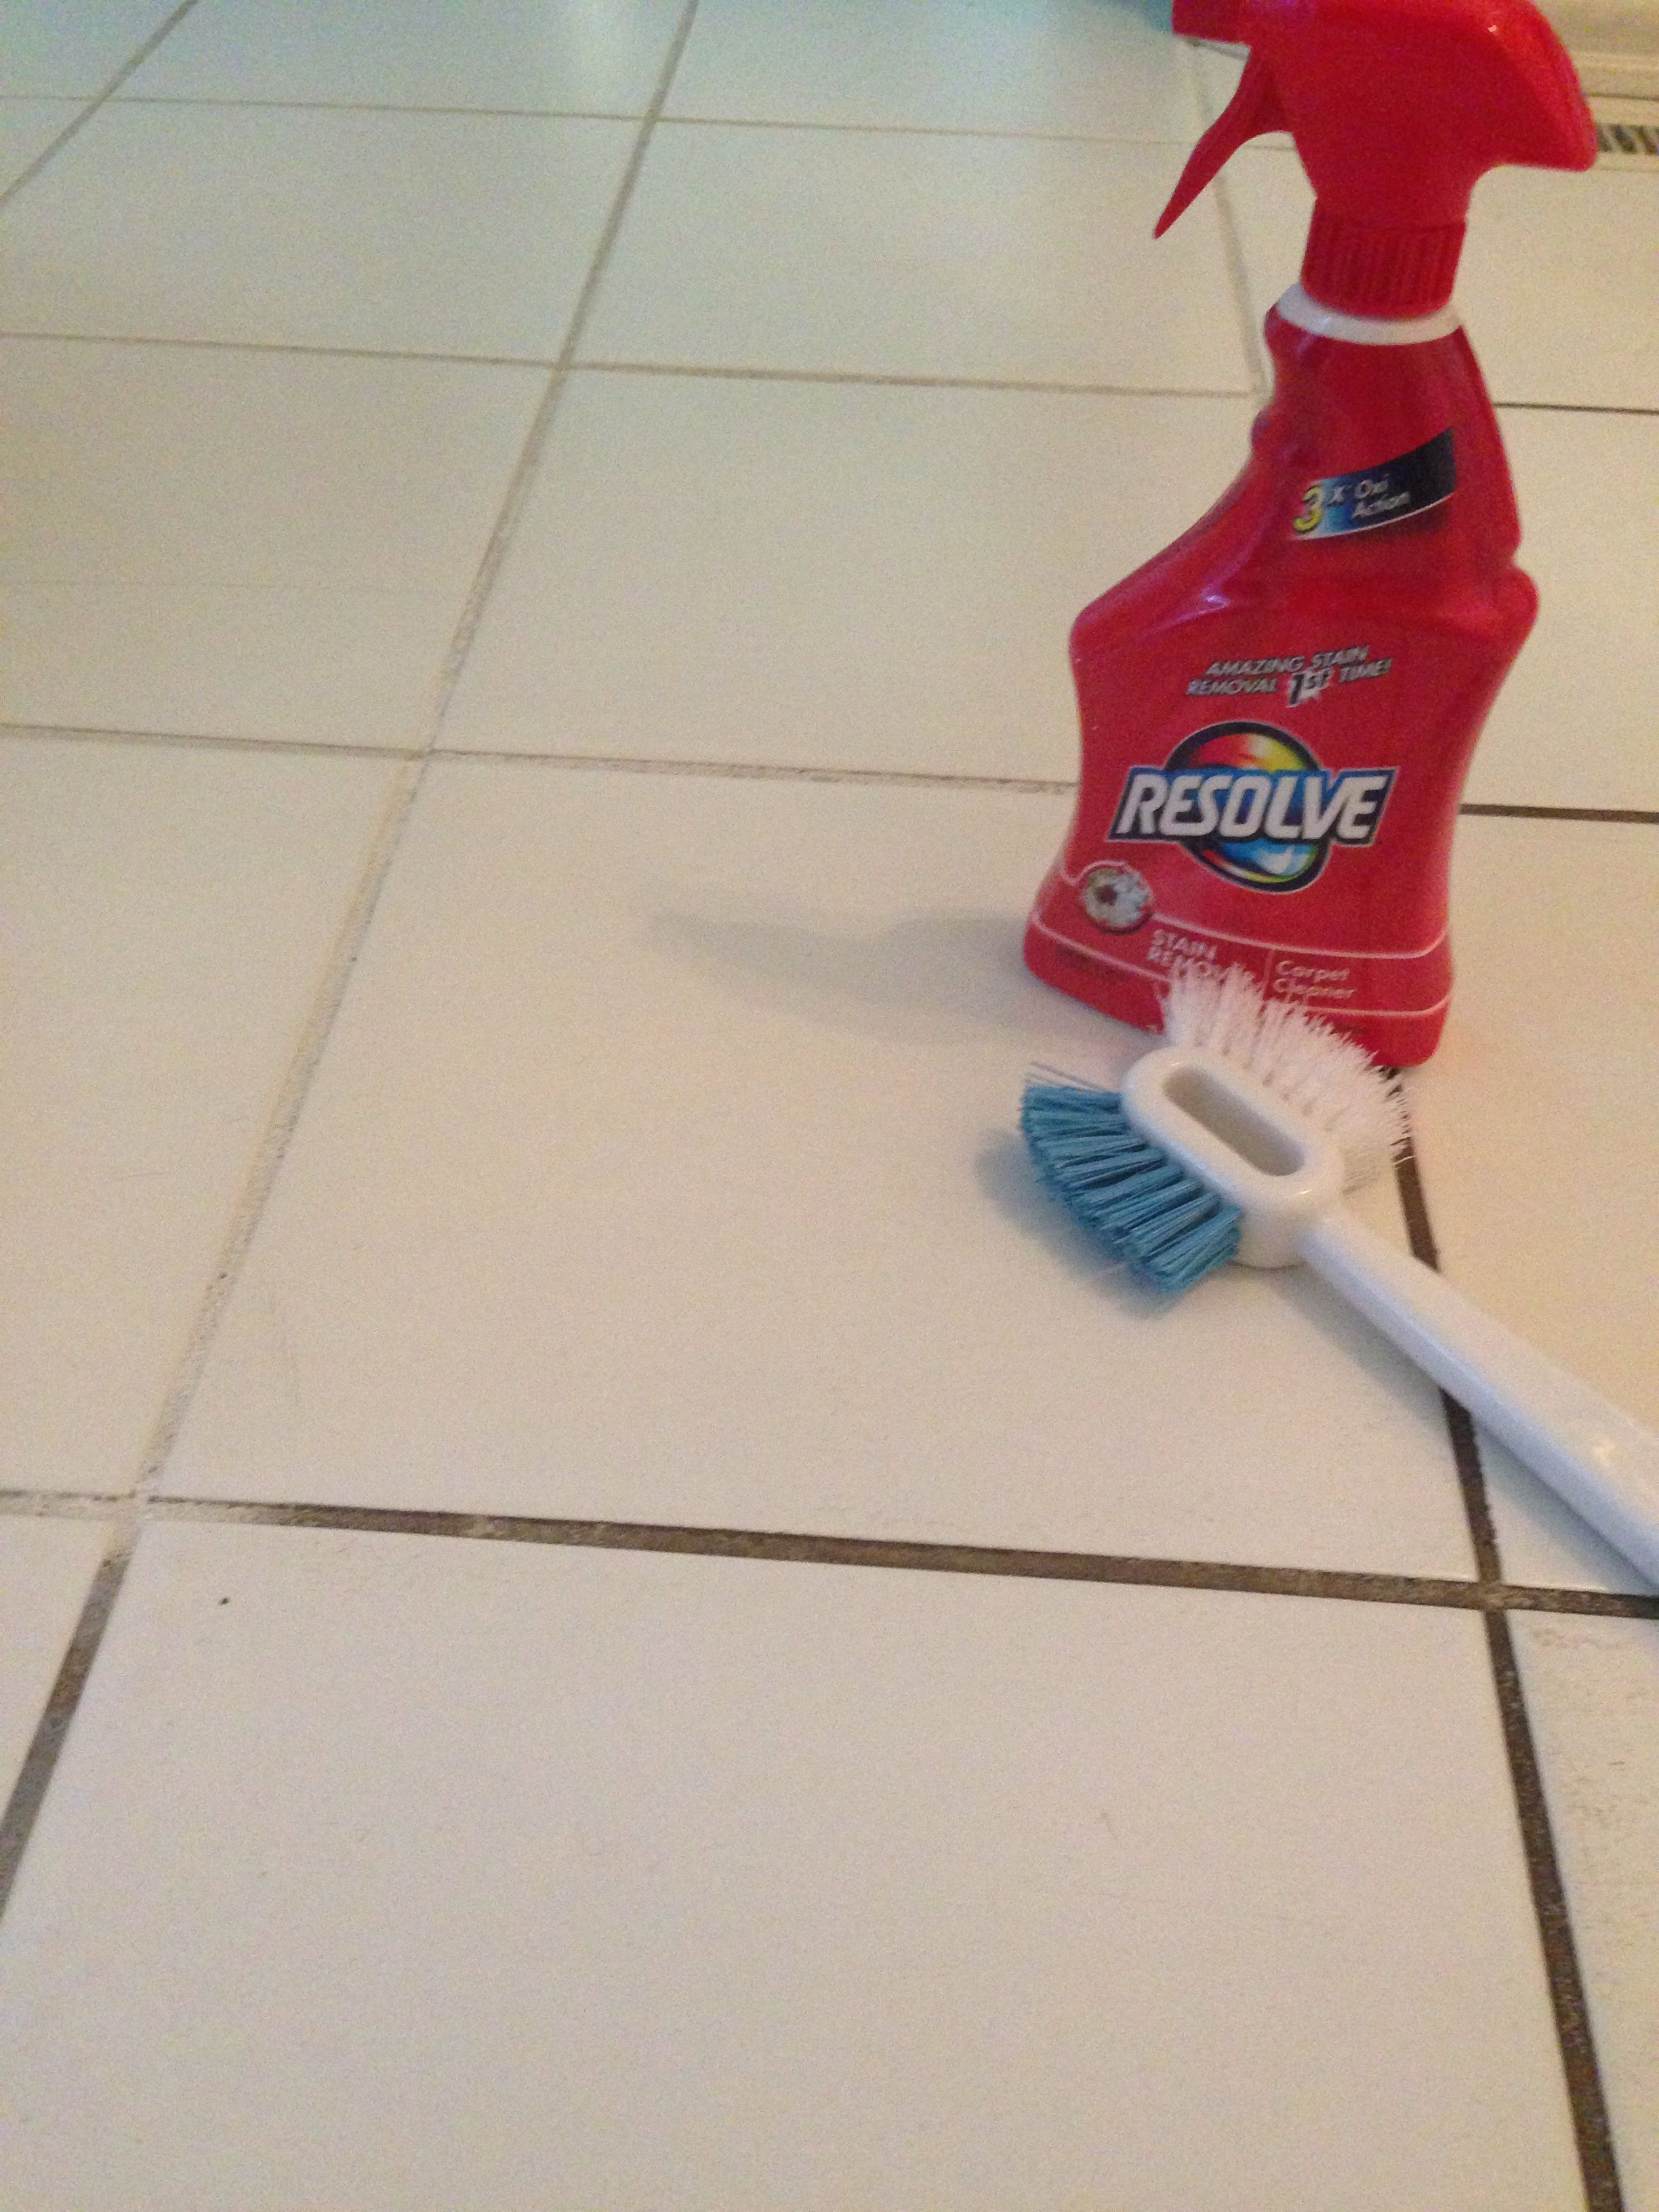 Resolve Carpet Cleaner To Clean Grout Cleaning Hacks intended for measurements 2448 X 3264